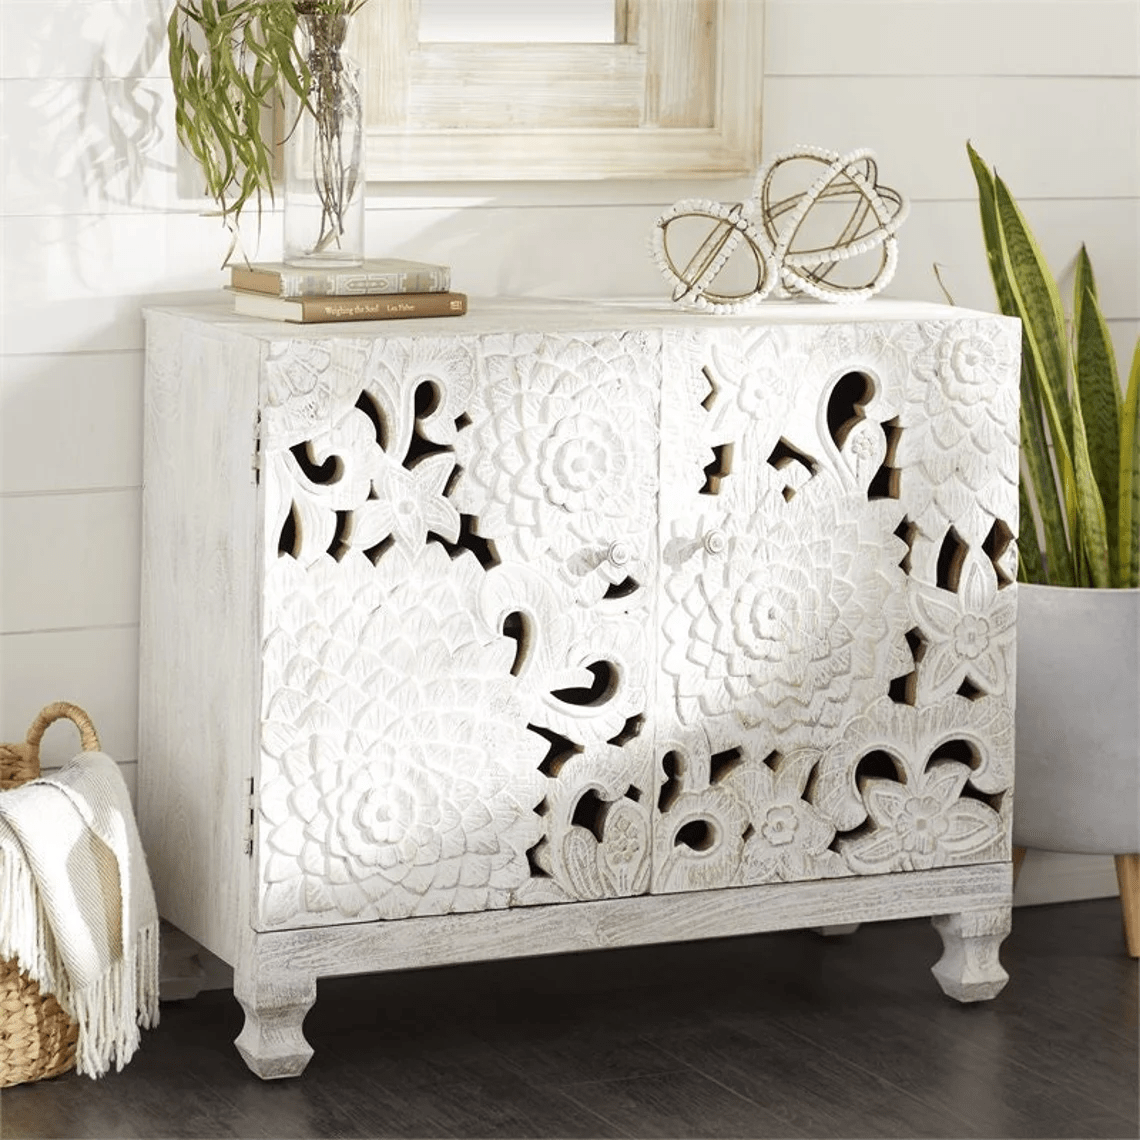 Hand Carved Lotus Storage Cabinet | Handmade White Color Wooden Cabinet Cabinet - Bone Inlay Furnitures